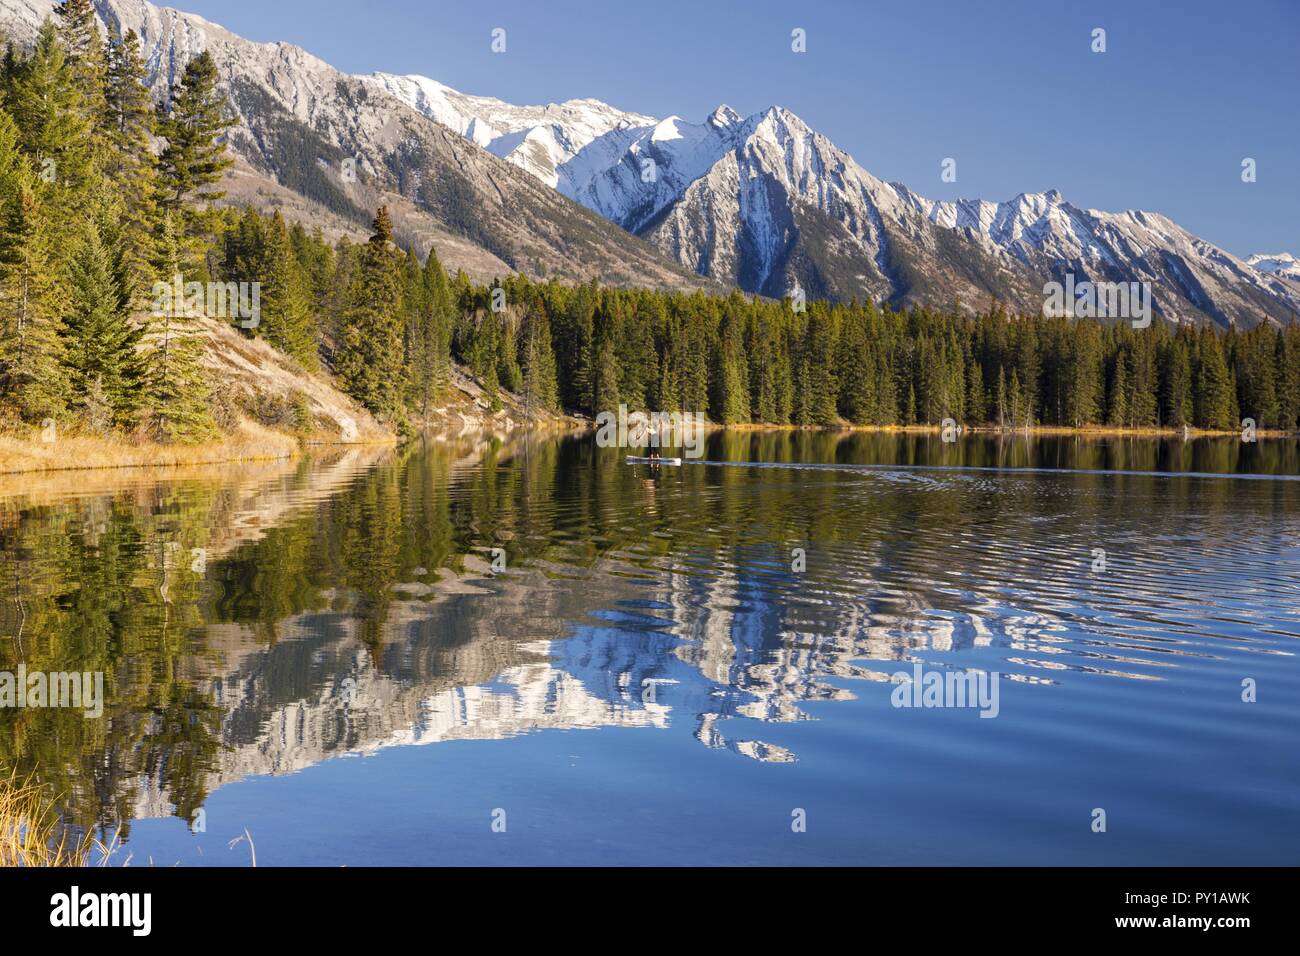 Beautiful Autumn Landscape Mountain Reflections and athletic Female on paddleboard in calm water of Johnson Lake, Banff National Park Alberta Canada Stock Photo